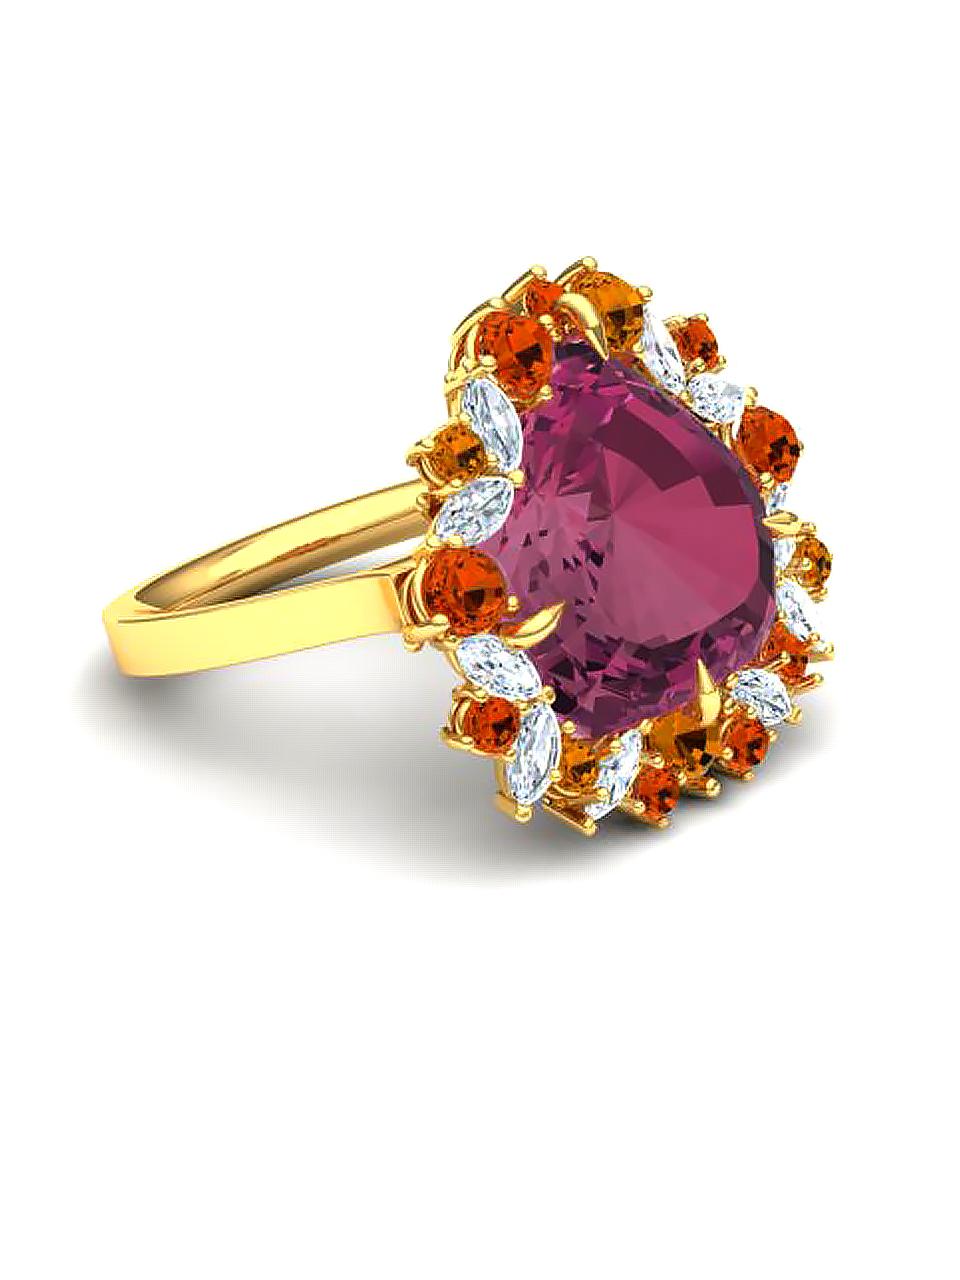 Pear Cut 9 Carat Tourmaline and Sapphire Diamond Cocktail Ring For Sale